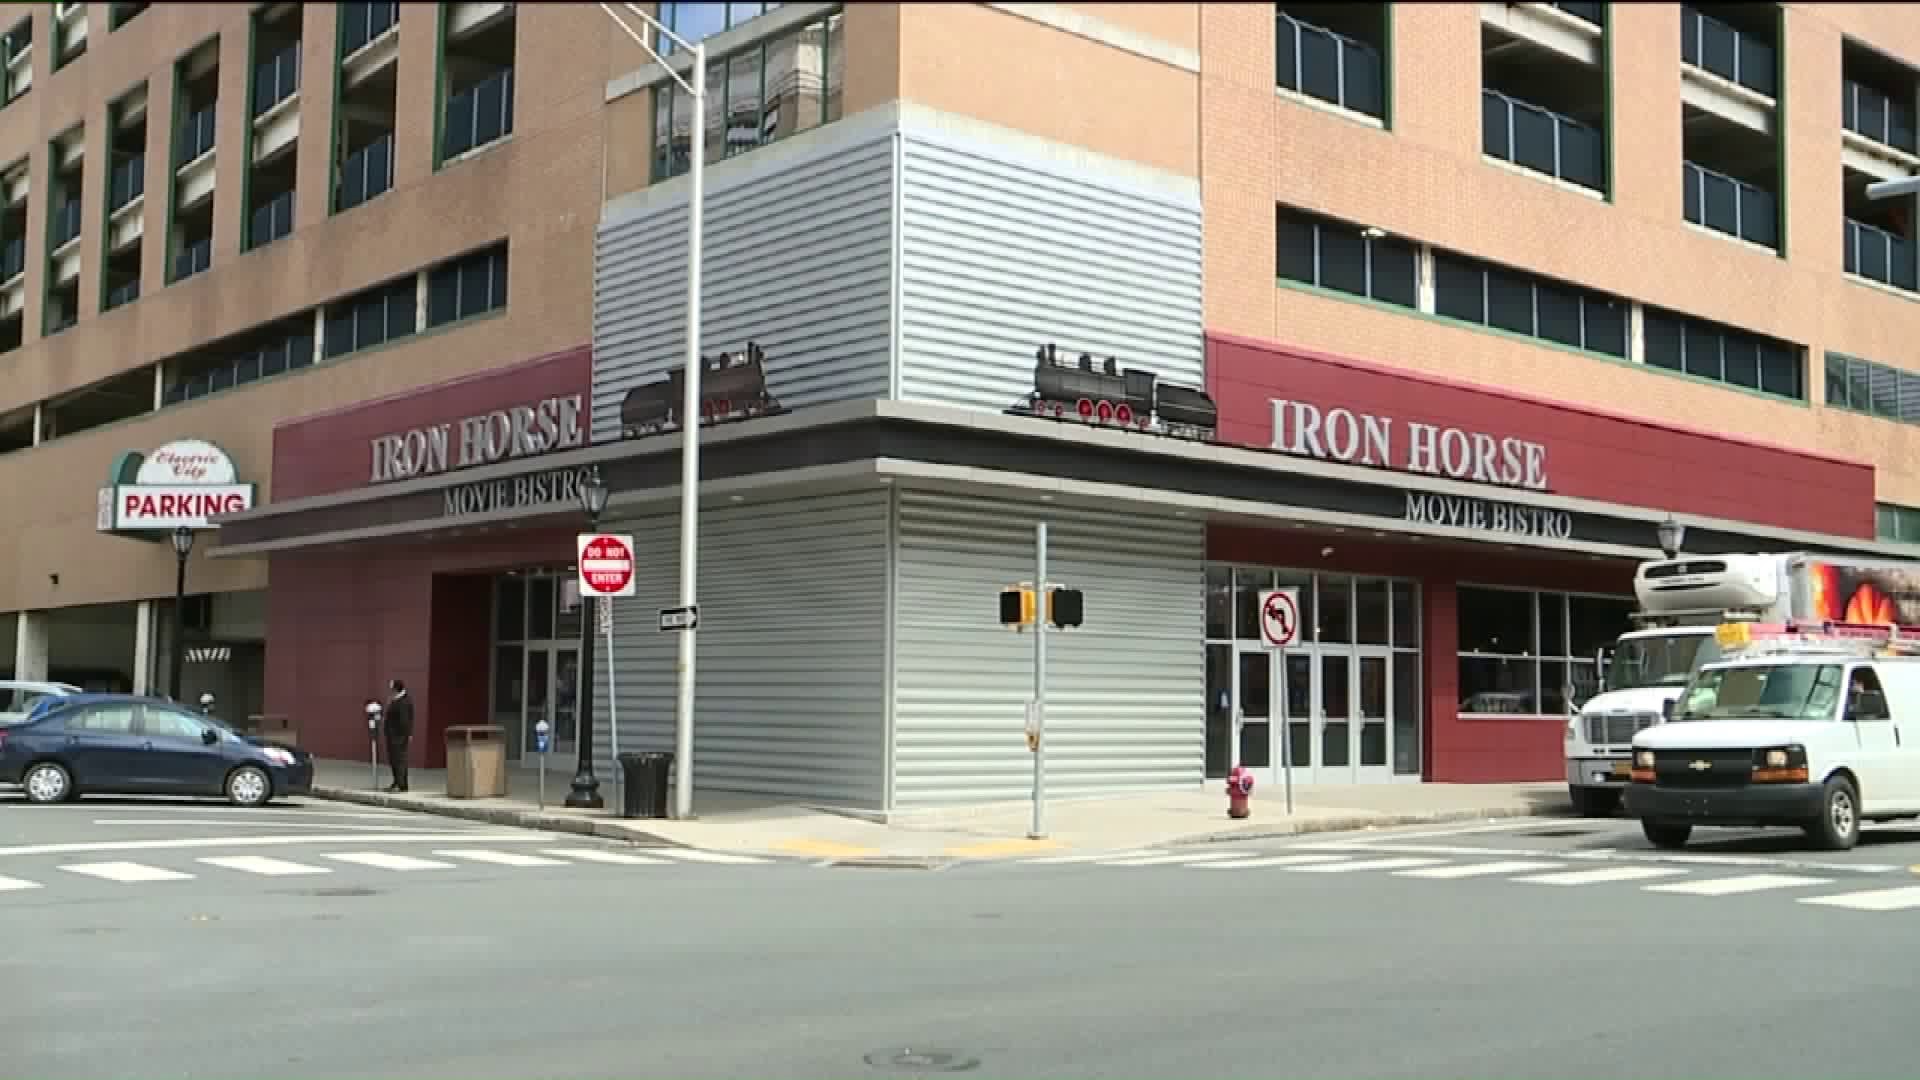 Movie Theater with a Twist Opening in Scranton